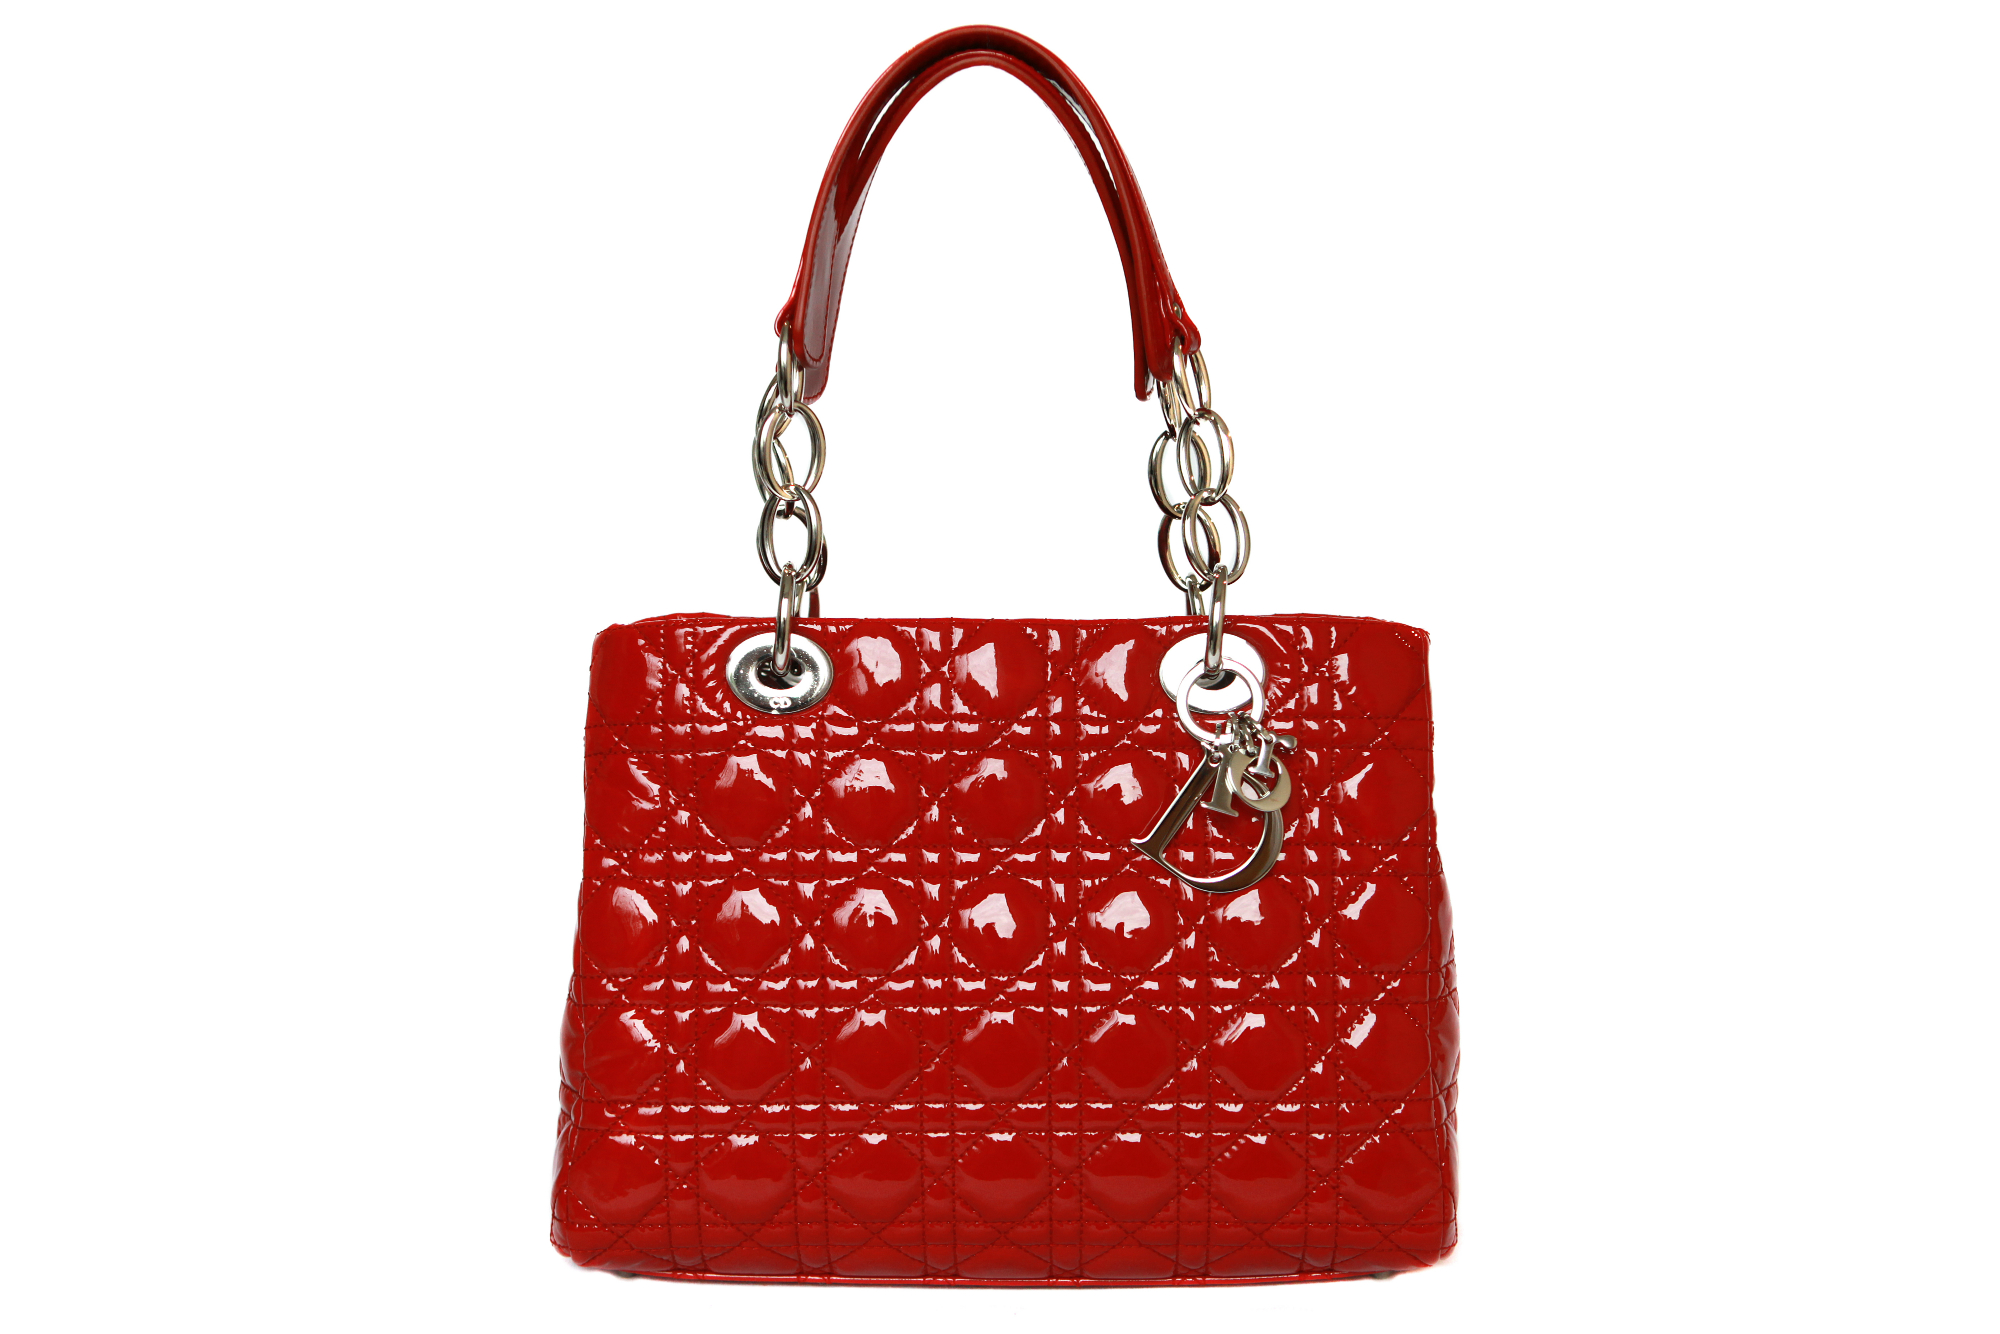 Hire a Christian Dior Soft bag and other Designer handbags from ELITE COUTURE